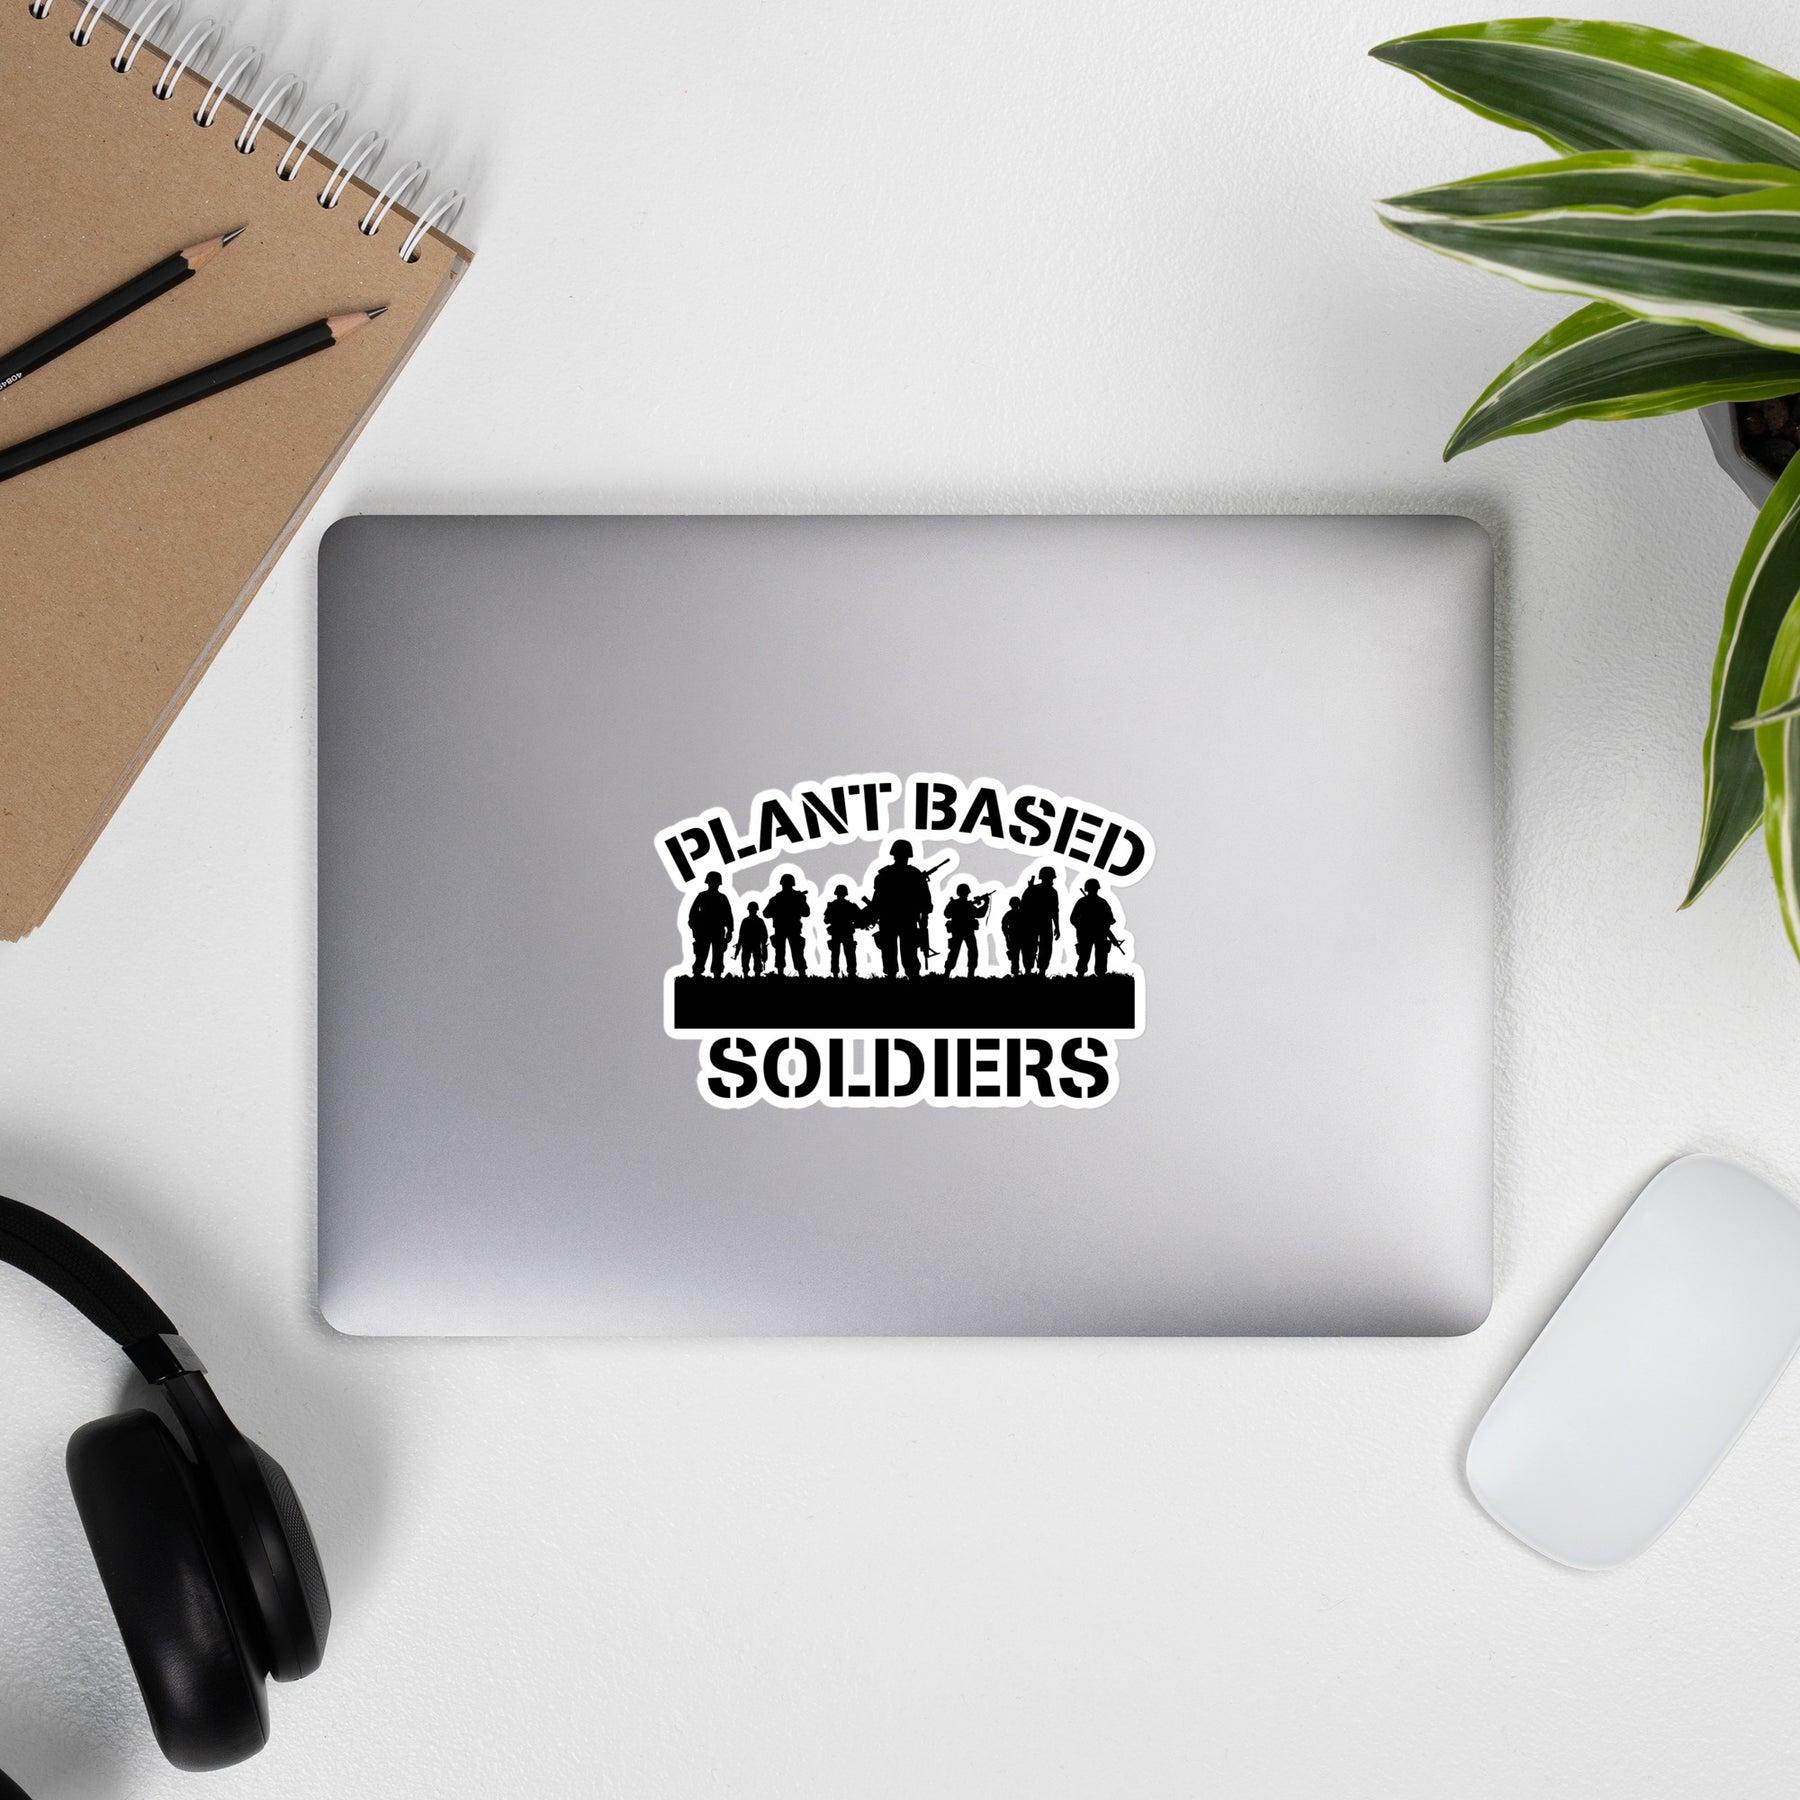 PLANT BASED SOLDIERS stickers